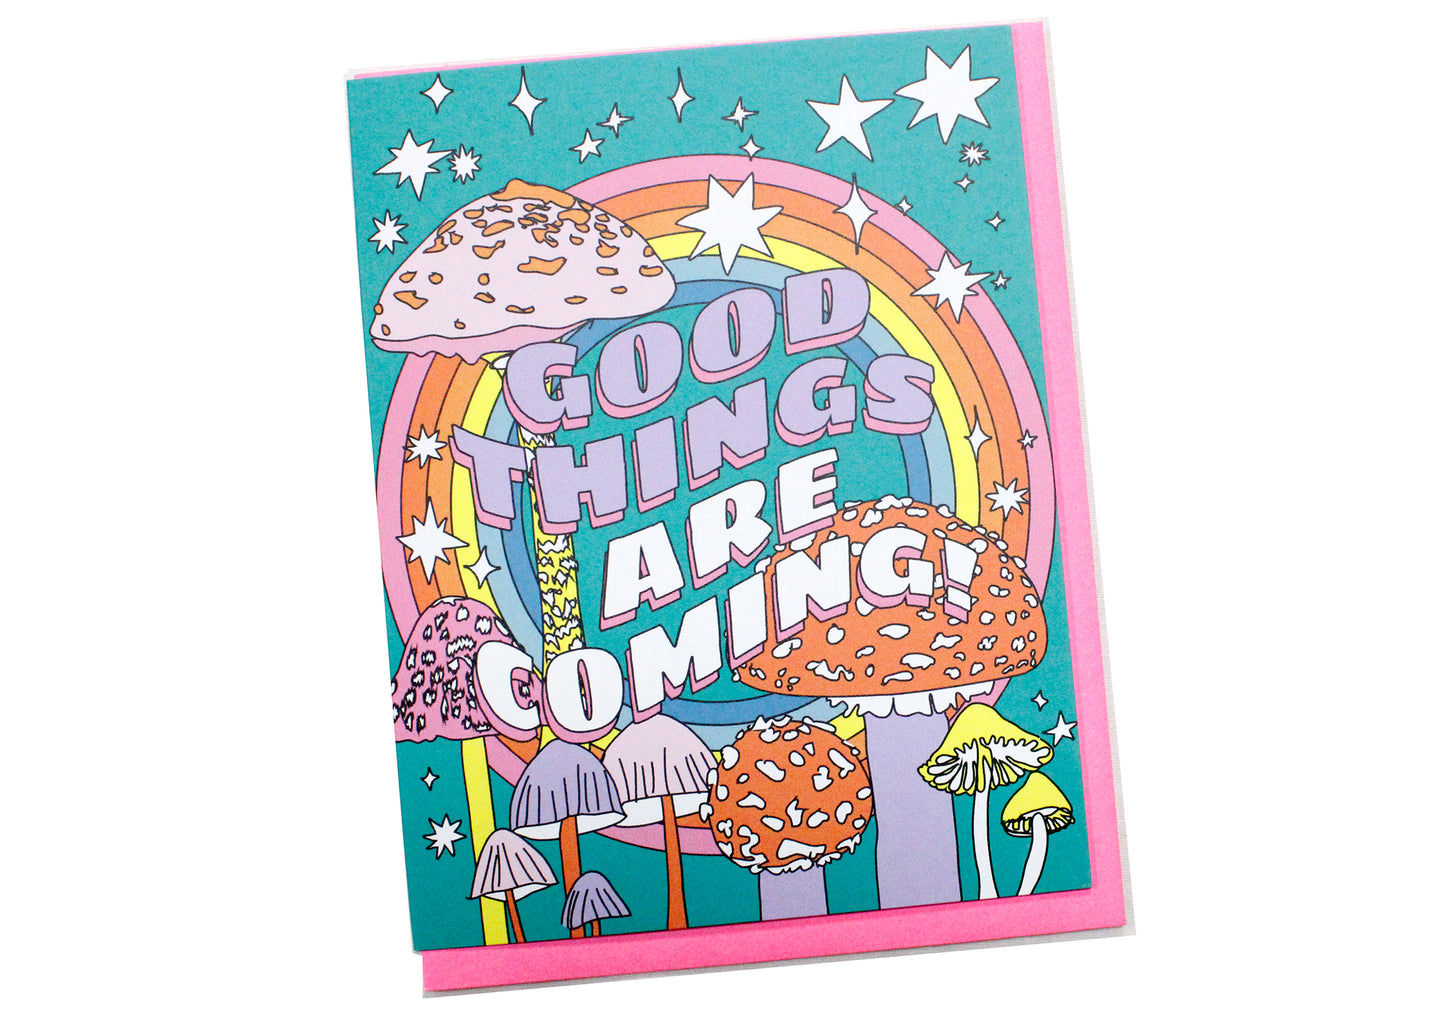 Good Things Are Coming Card